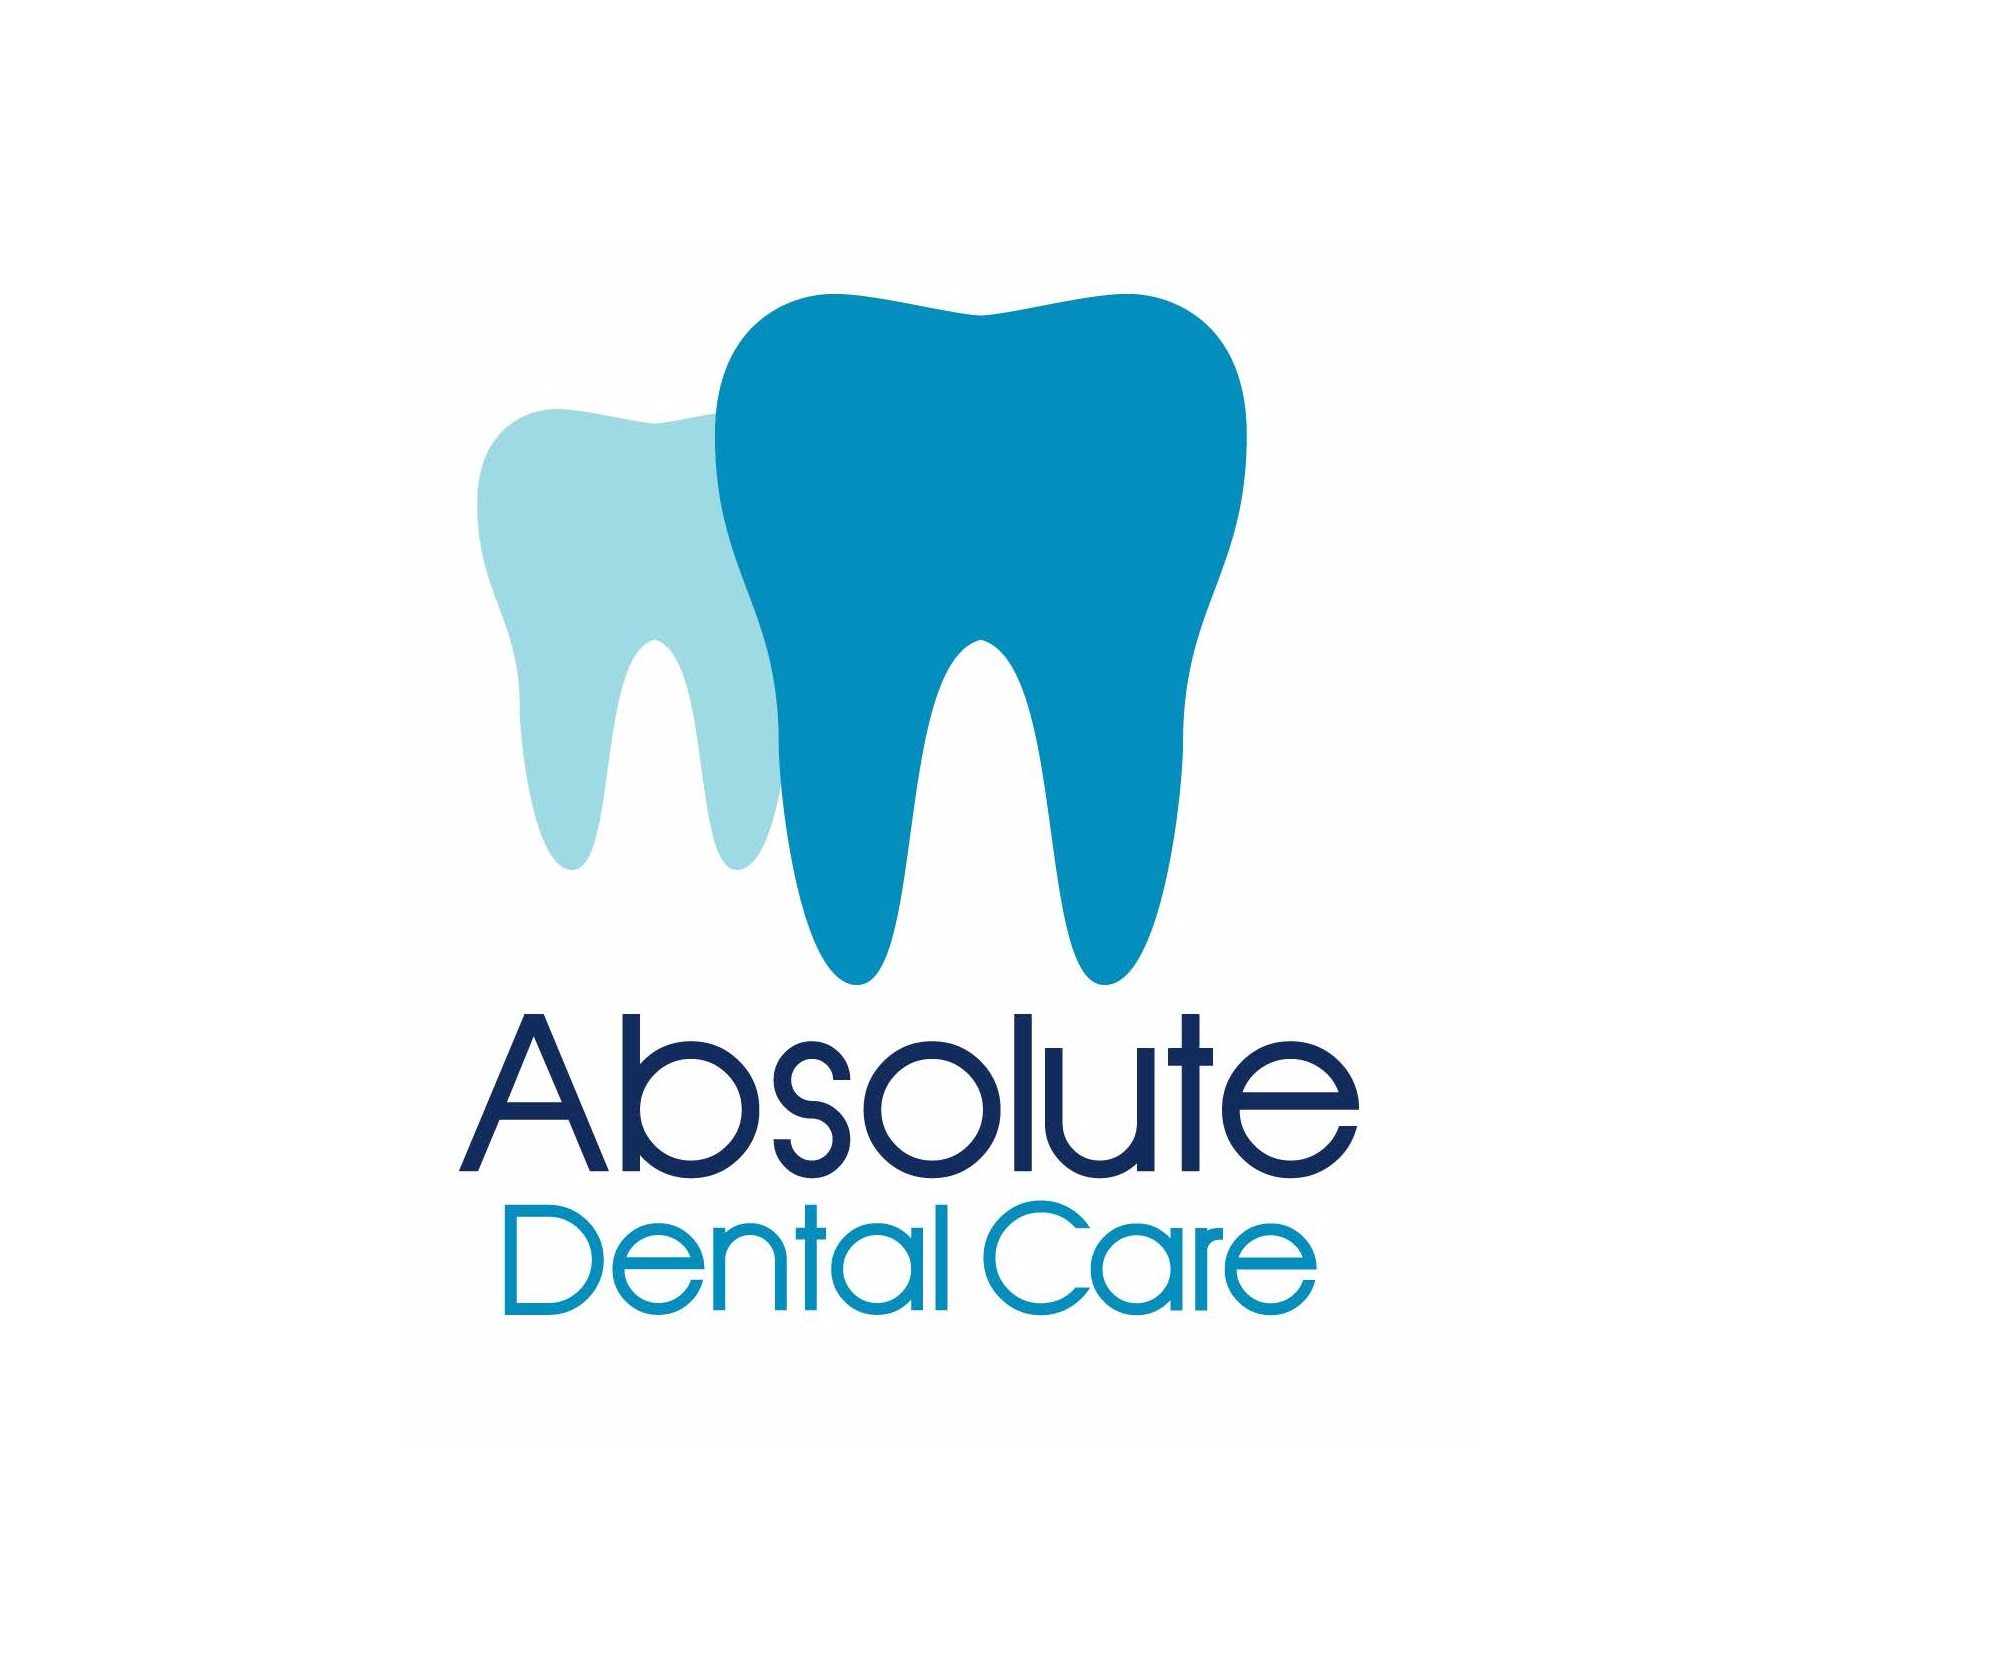 Absolute Dental Care